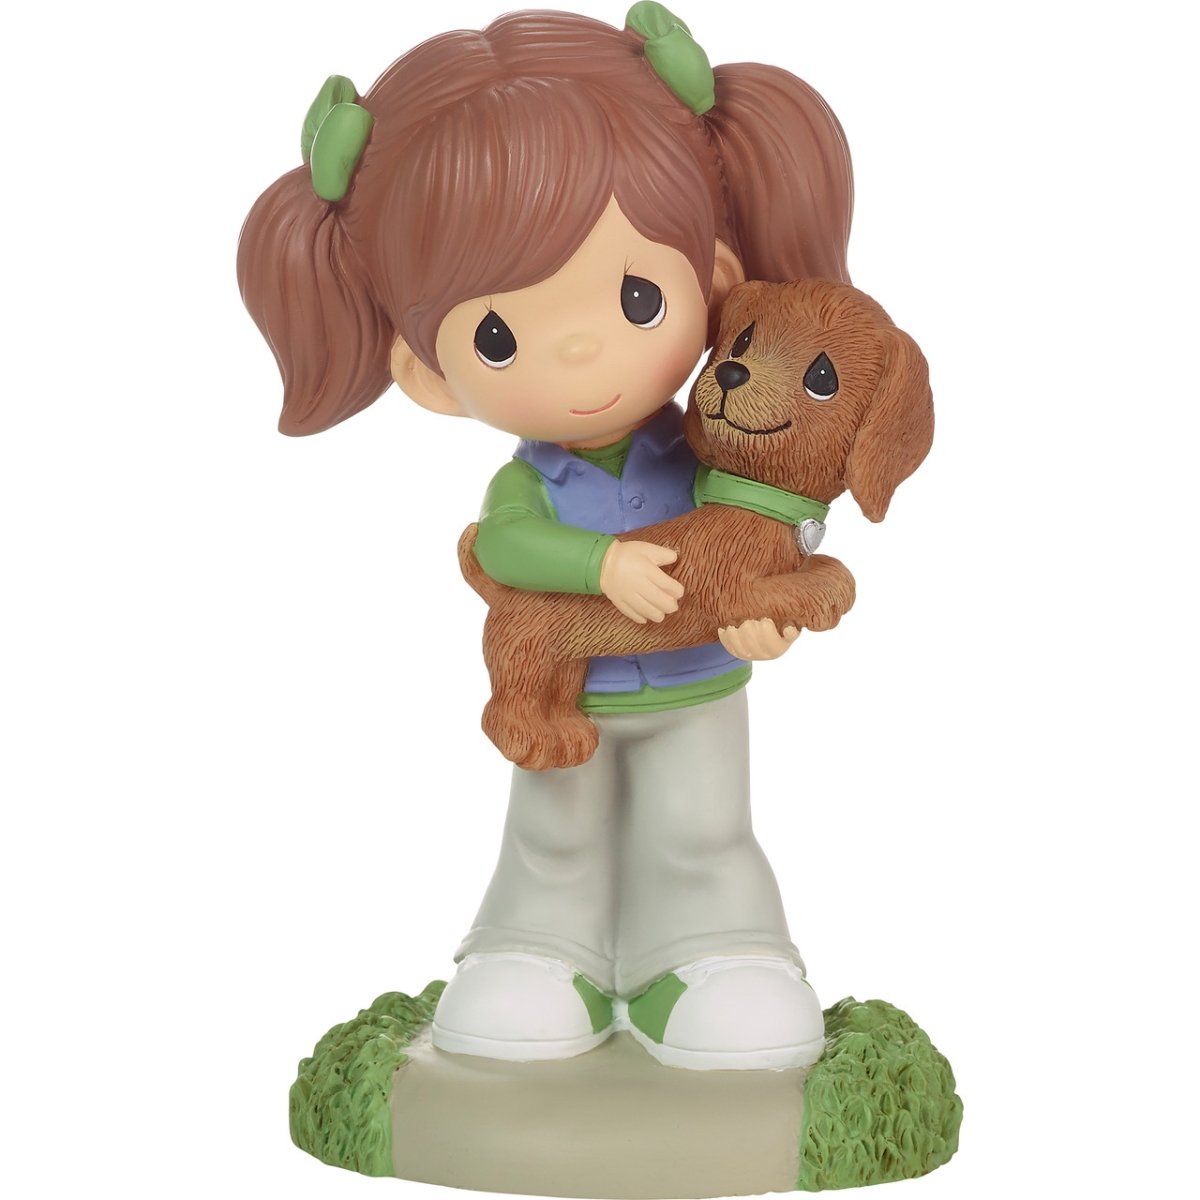 Picture of Be the Light Christian Bookstore 226403 5.5 in. Resin Girl Figurine with Dachshund, Multi Color